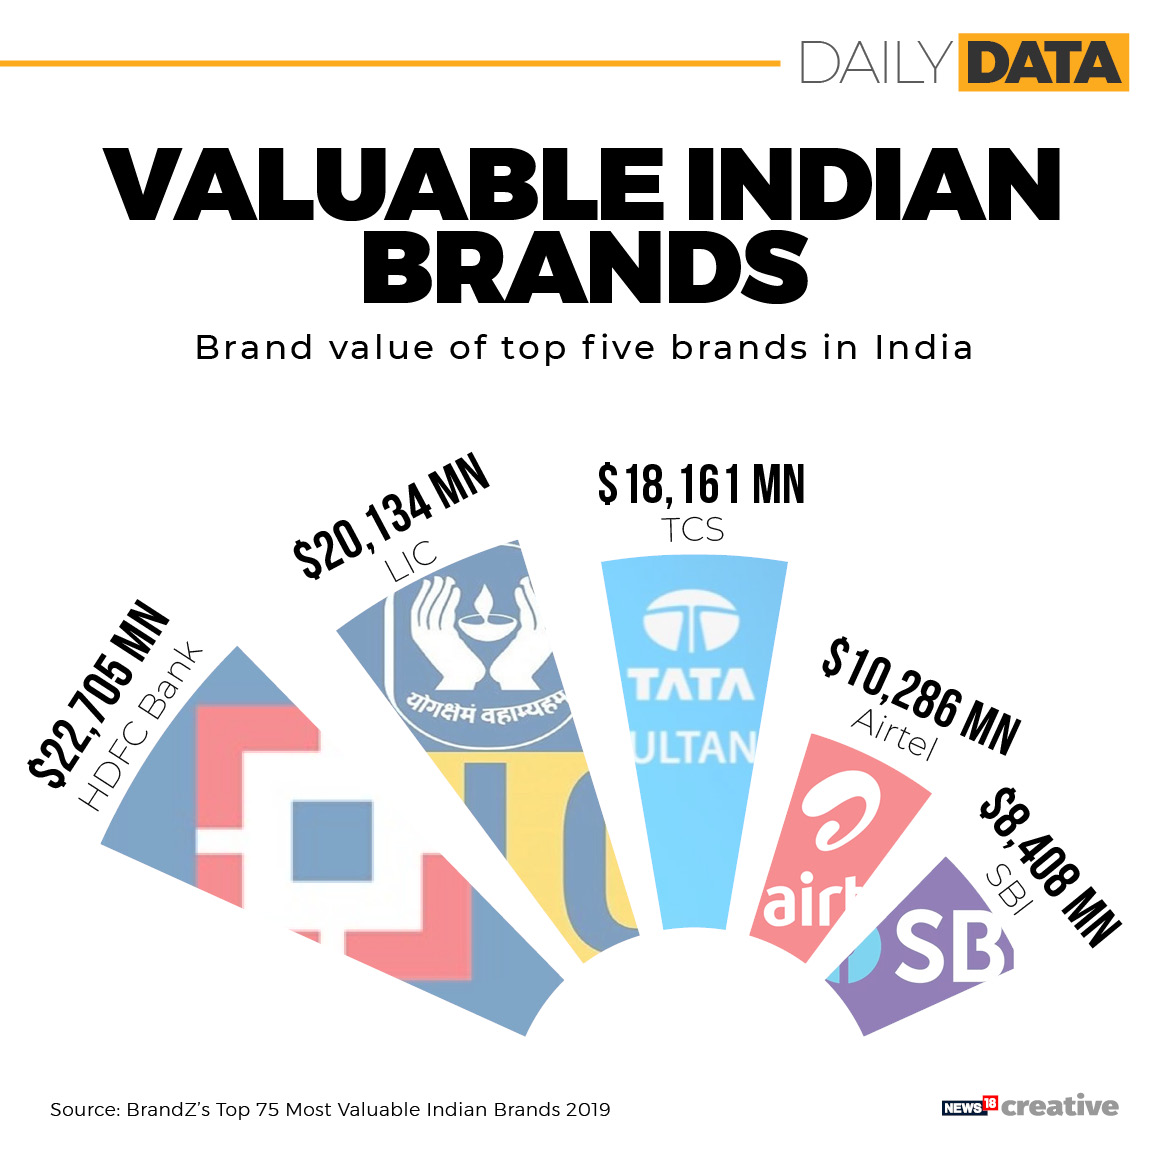 The five most valuable Indian brands are...